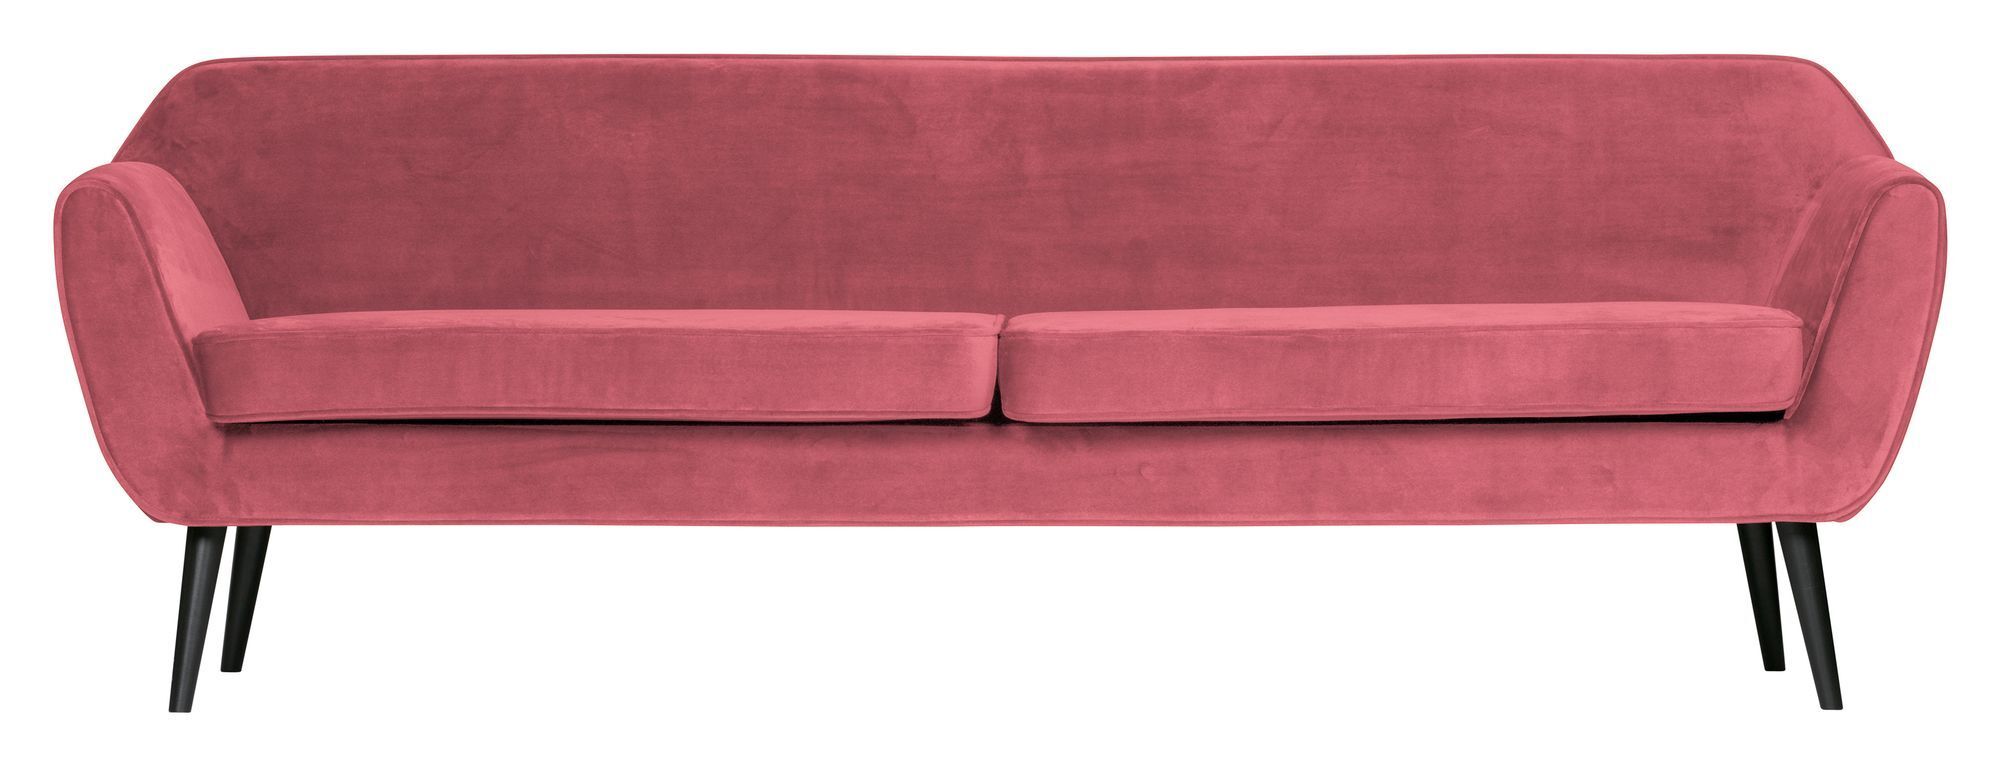 Woood Rocco 4-pers Sofa - Pink Velour   Unoliving